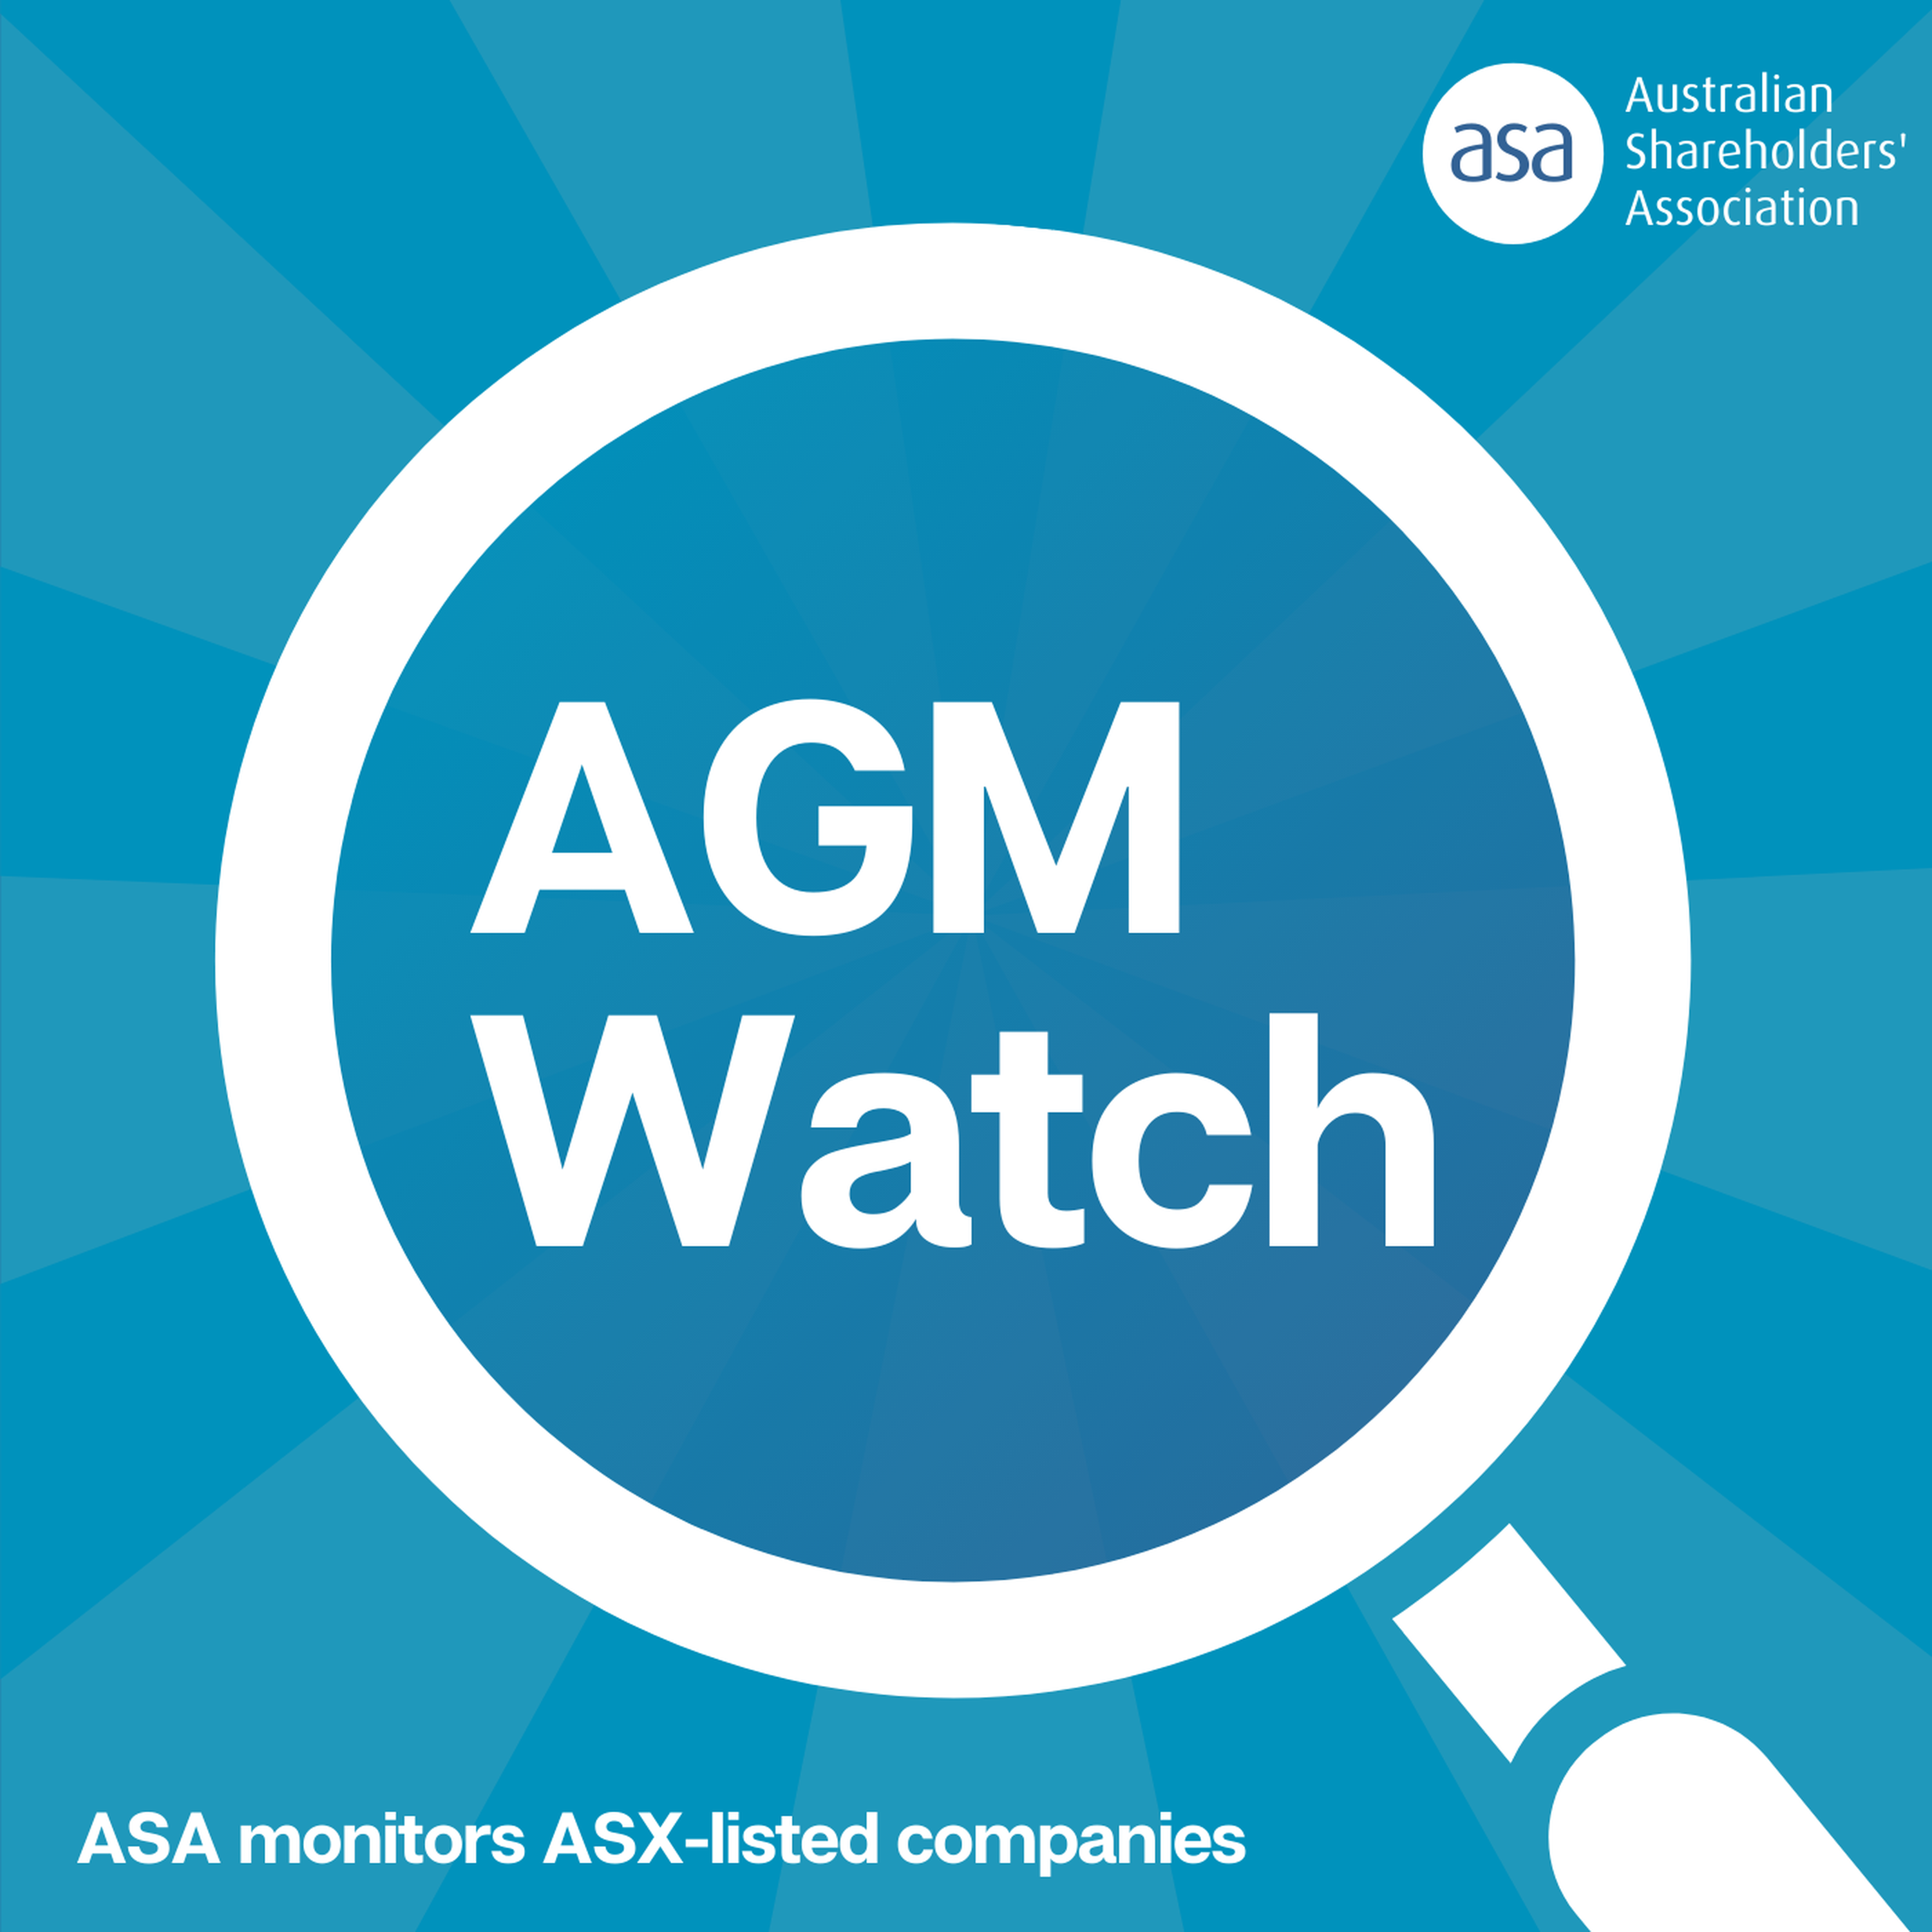 An Introduction to the 2020 ASX AGM Season